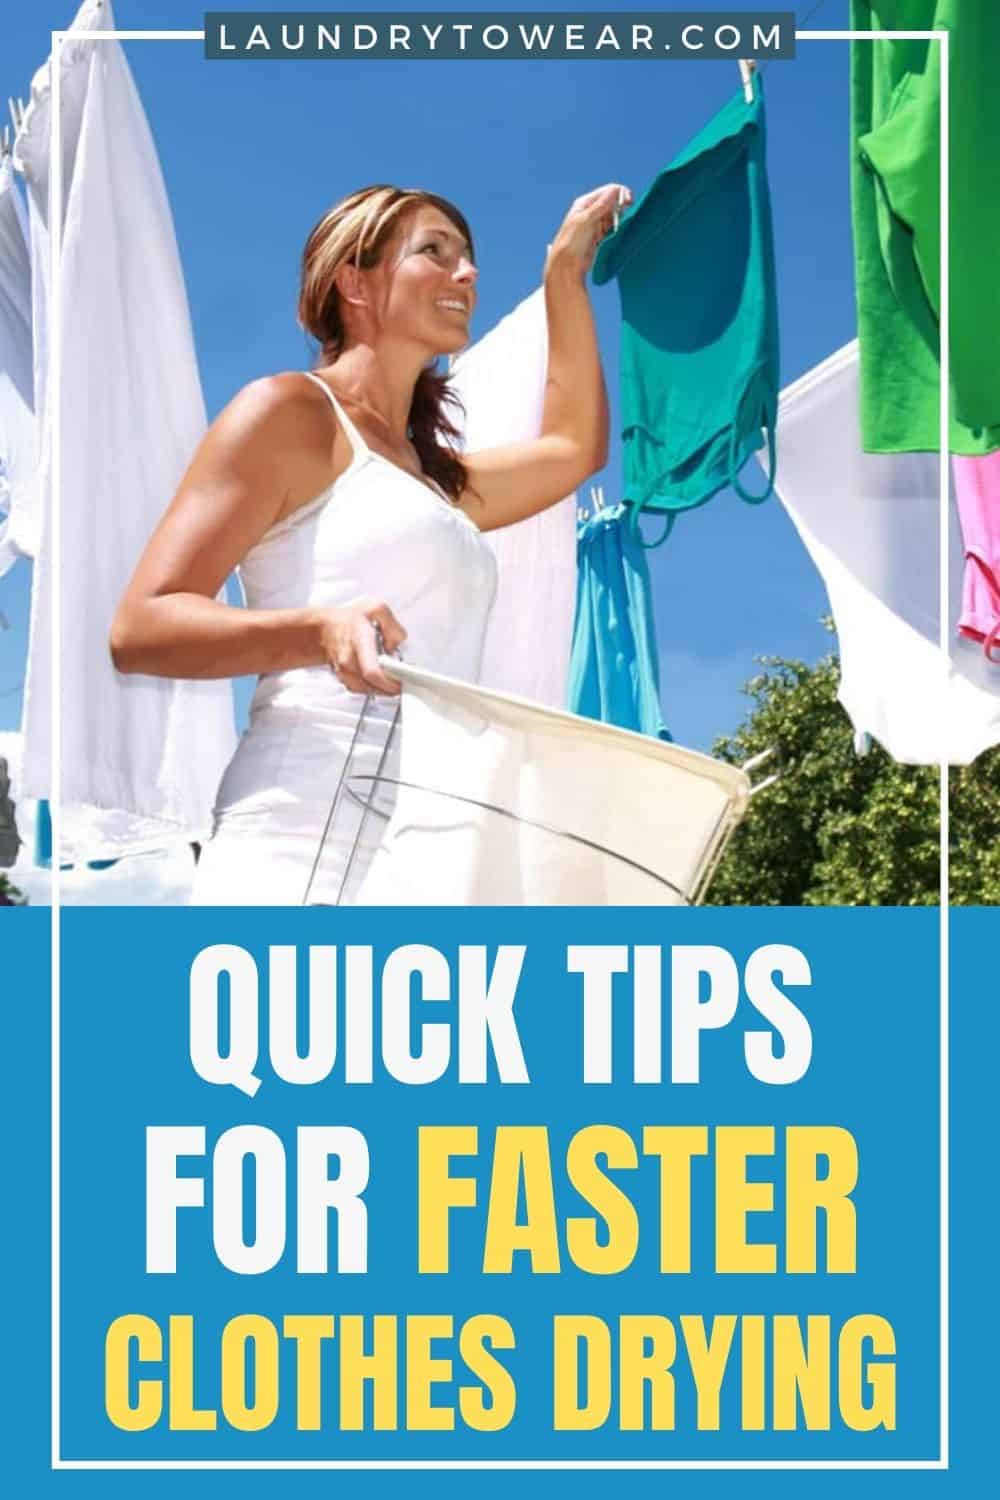 Quick Tips for Faster Clothes Drying